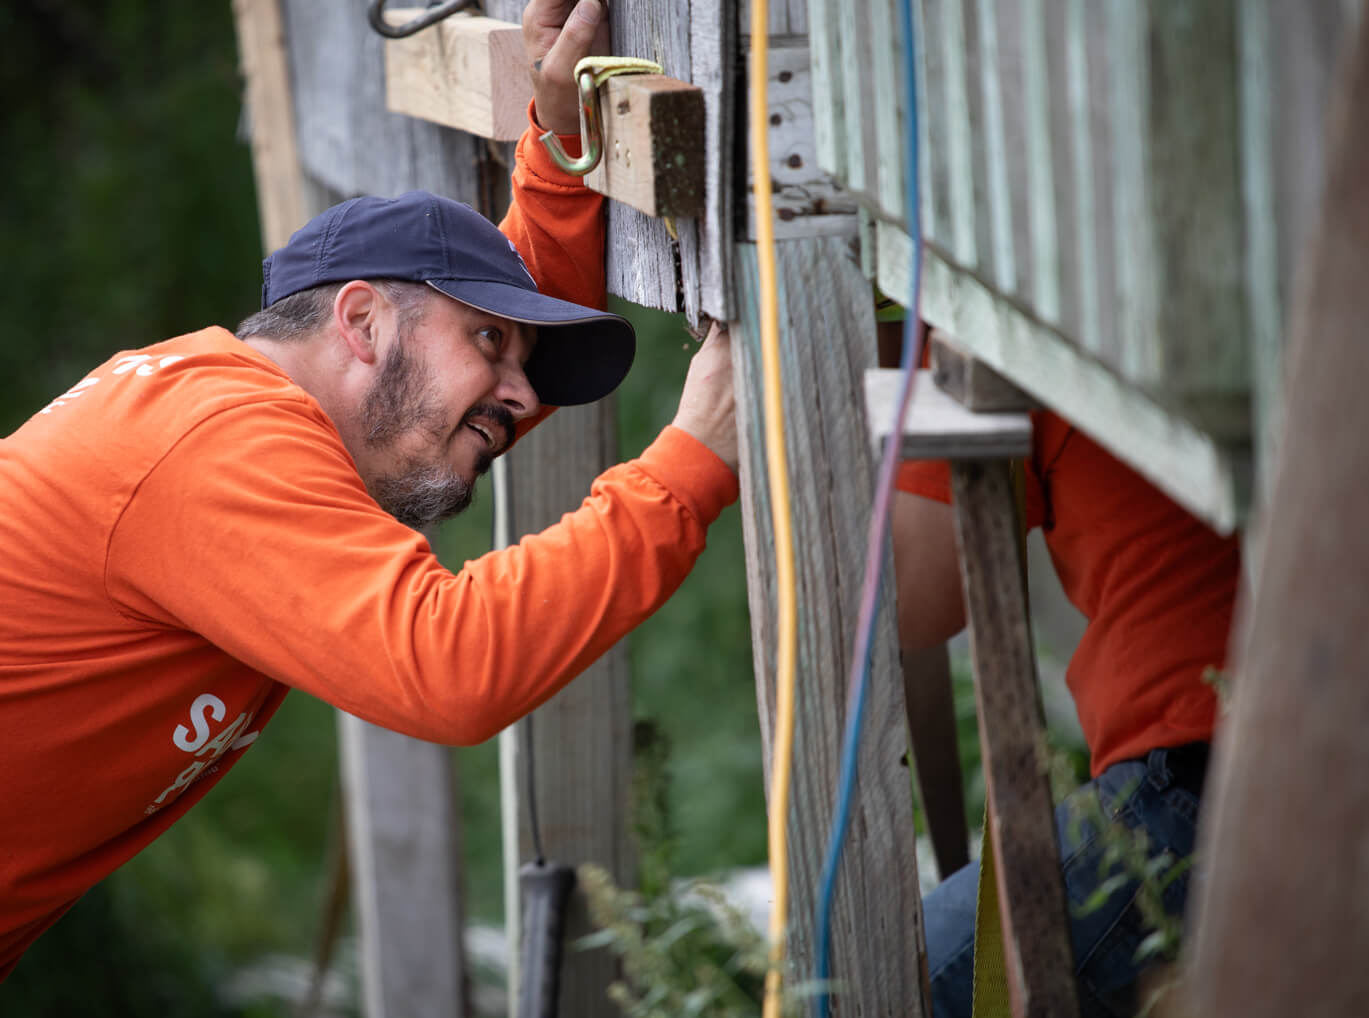 Volunteer Marc Tench worked on repairing the porch of a town leade